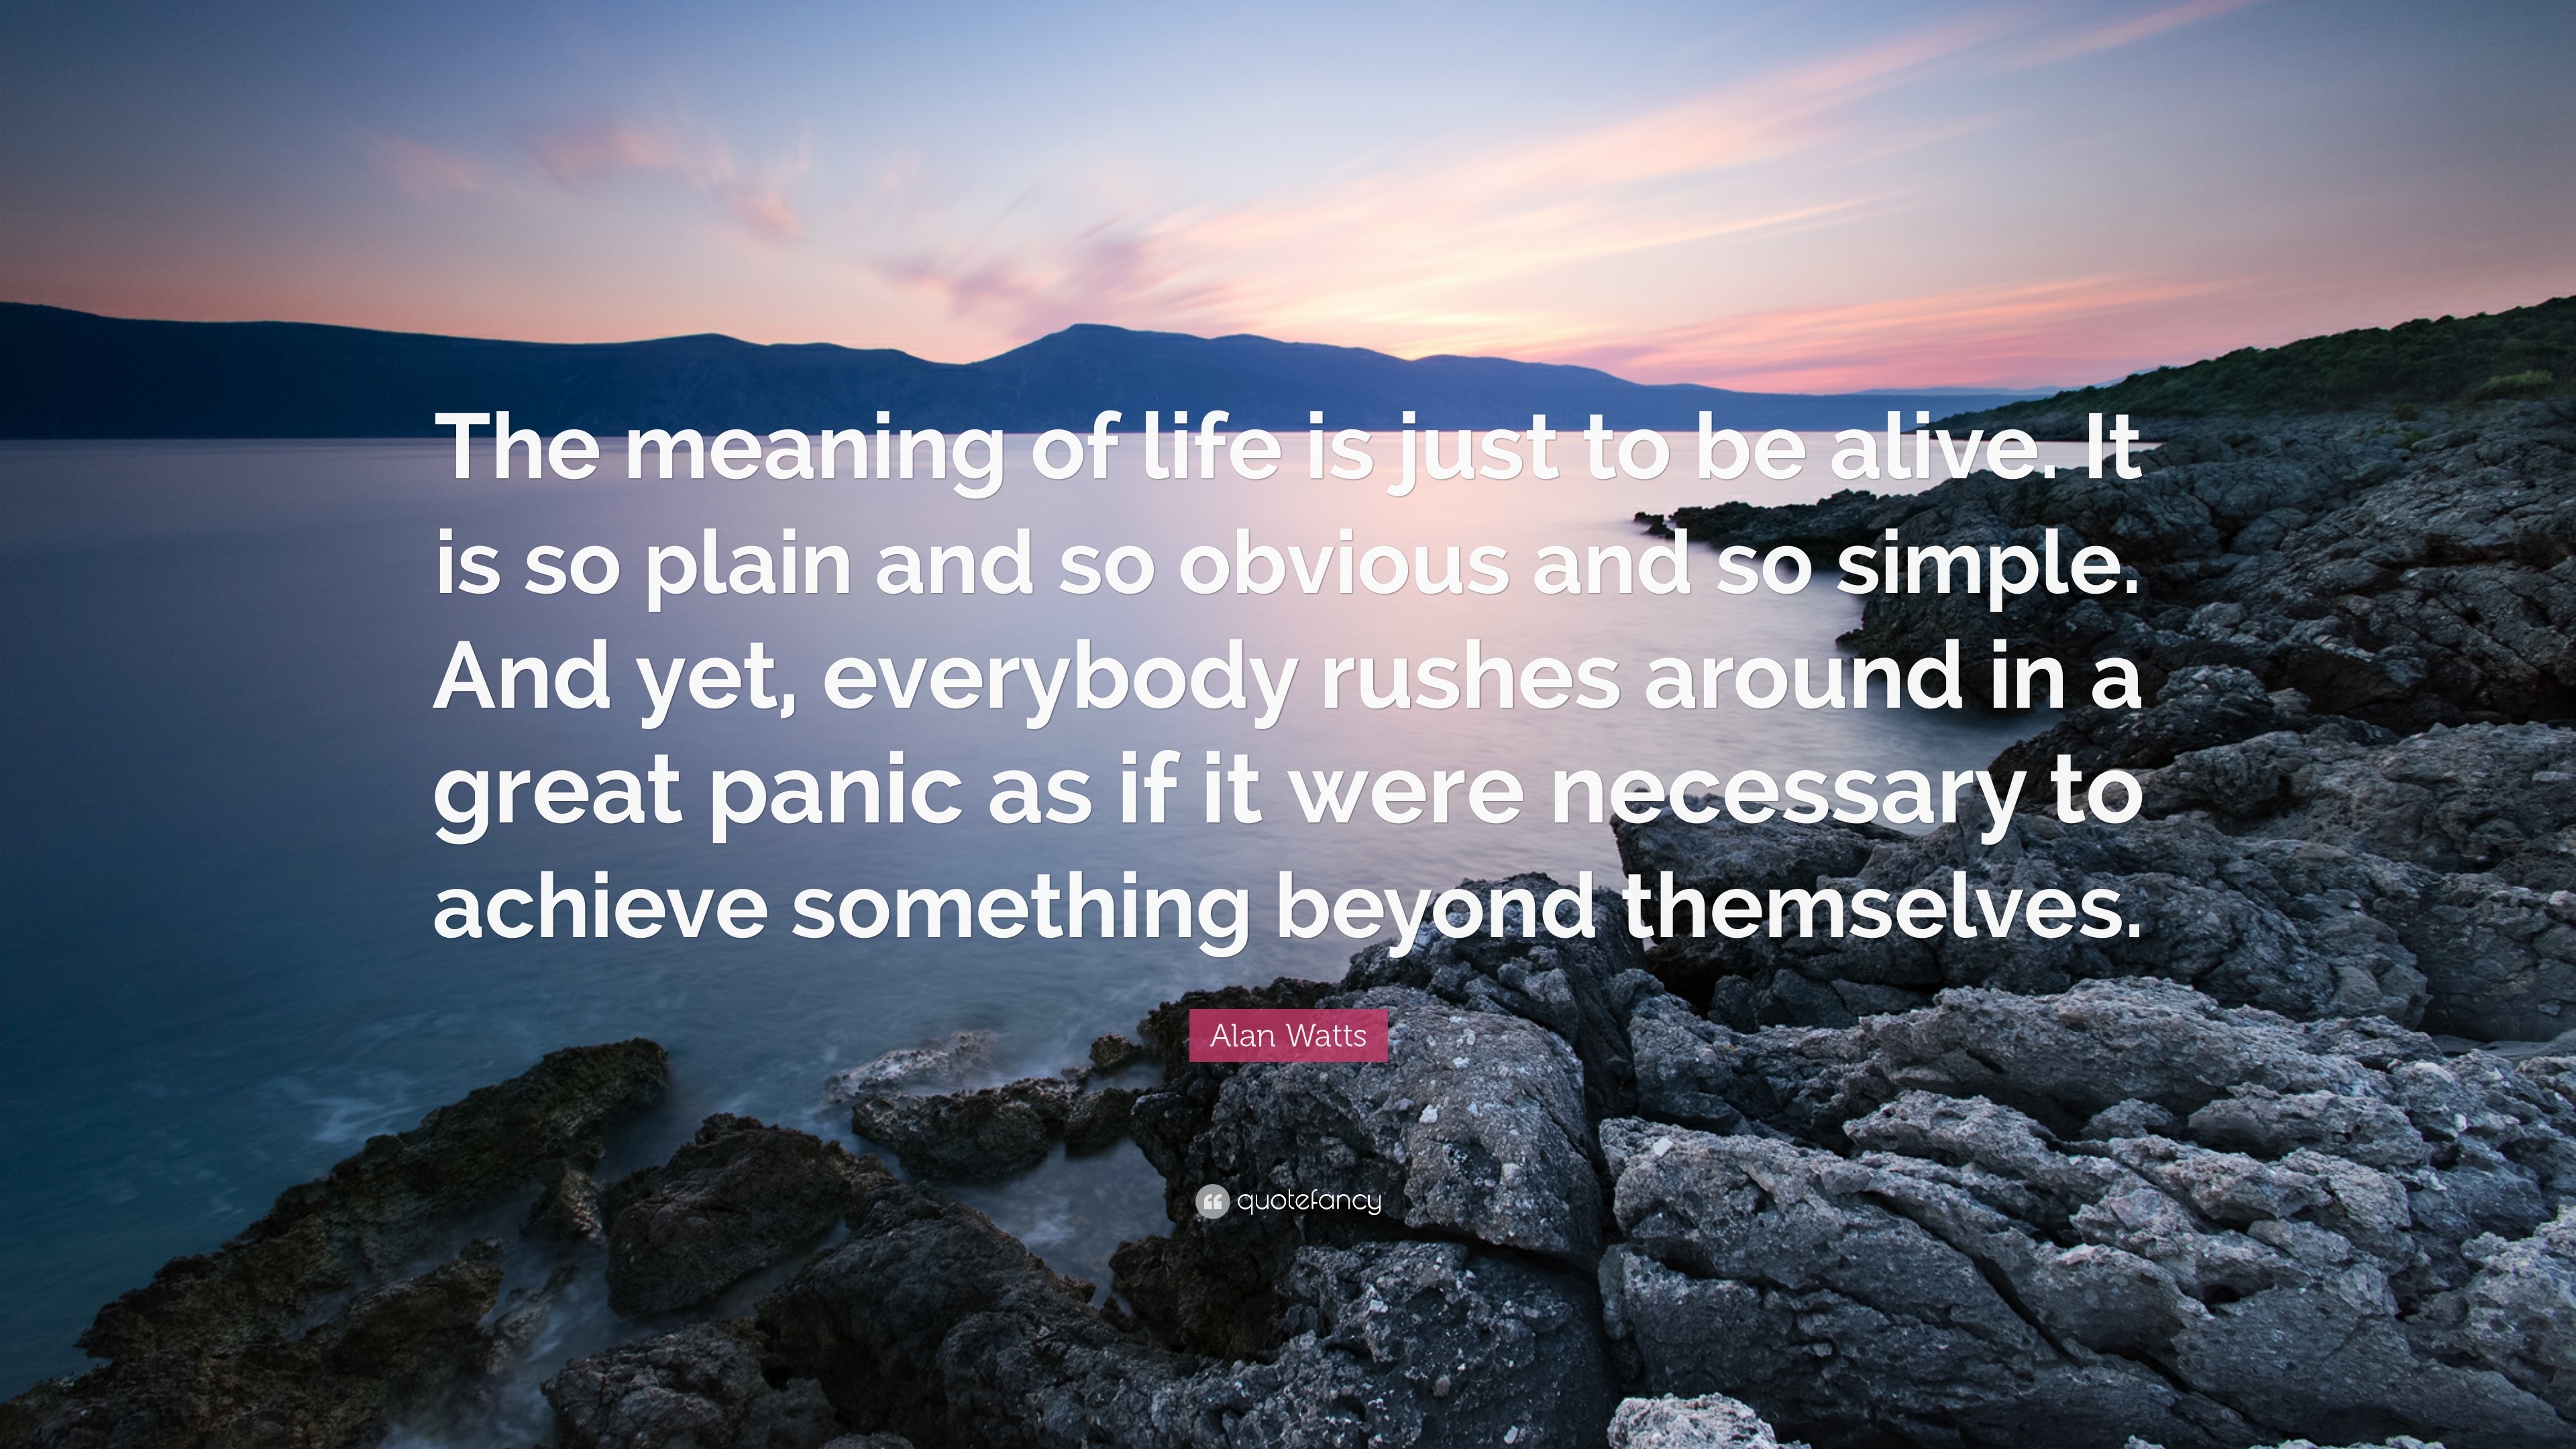 Alan Watts Quote “The meaning of life is just to be alive